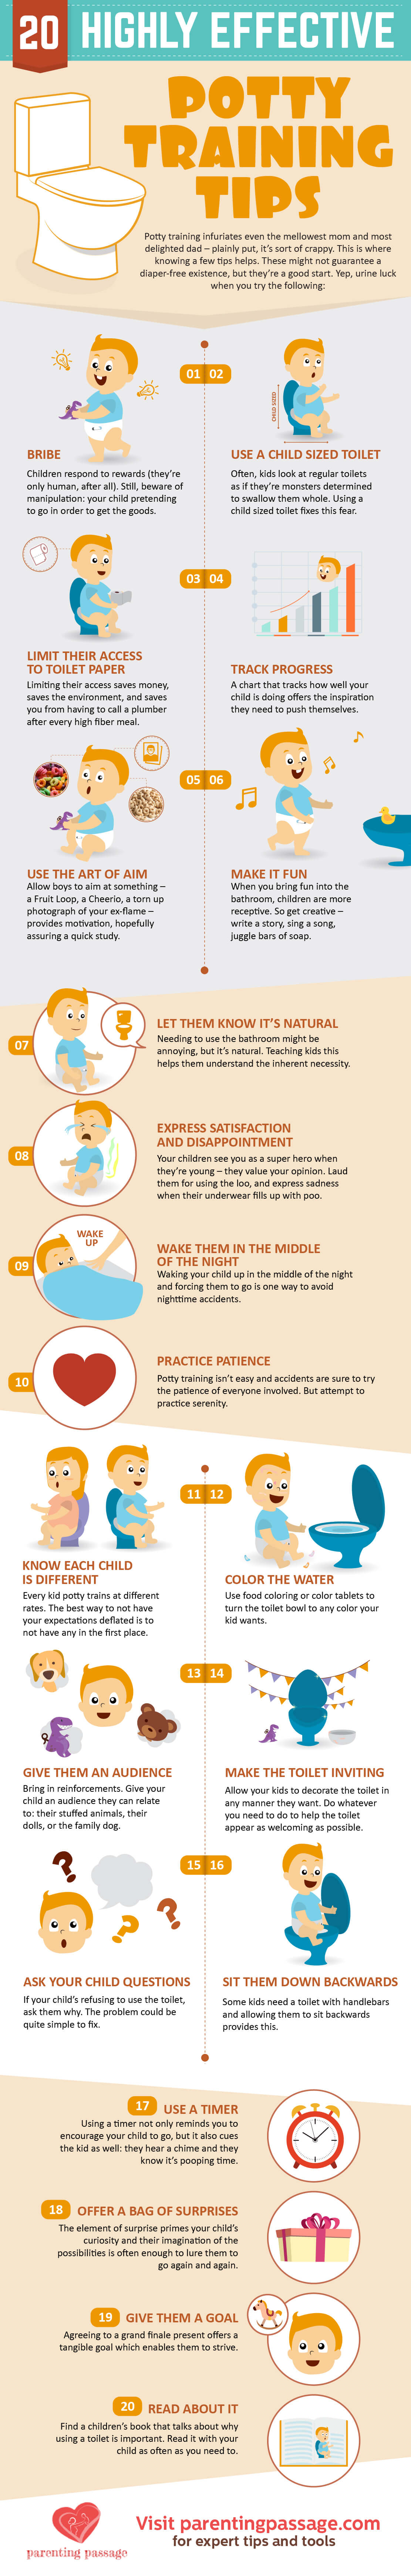 20 Highly Effective Potty Training Tips